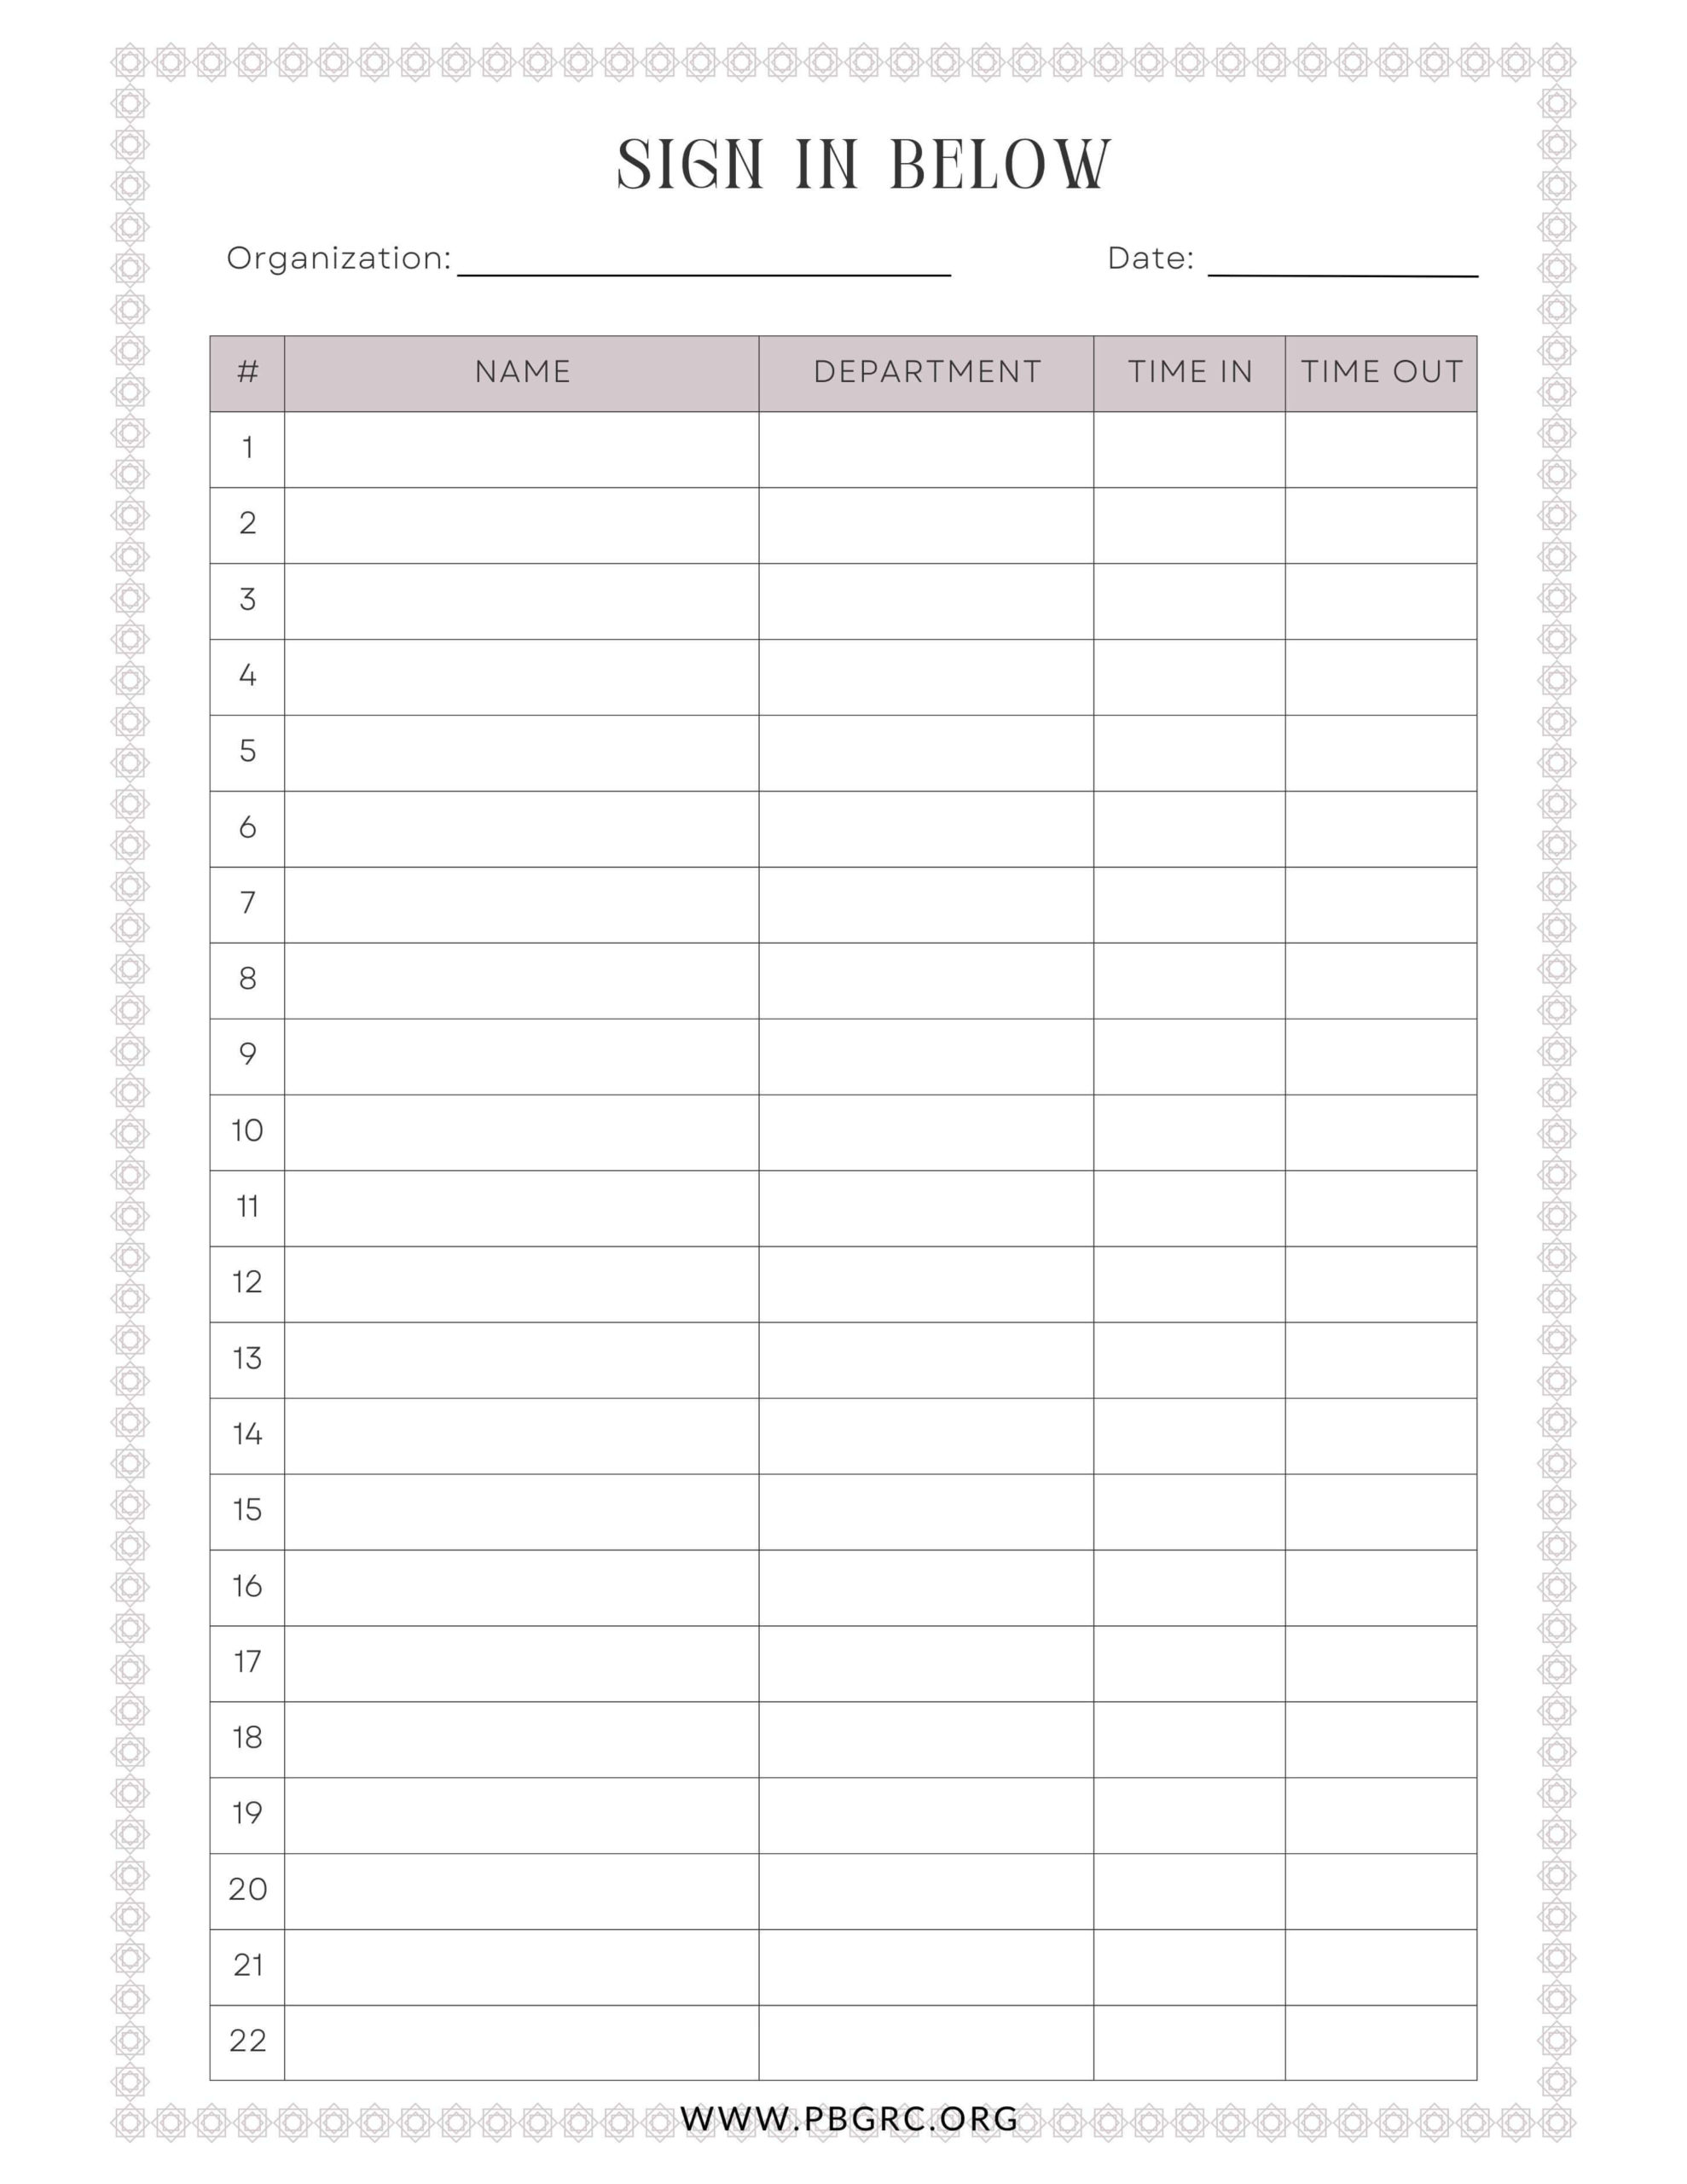 Sign-In Sheet Template Free